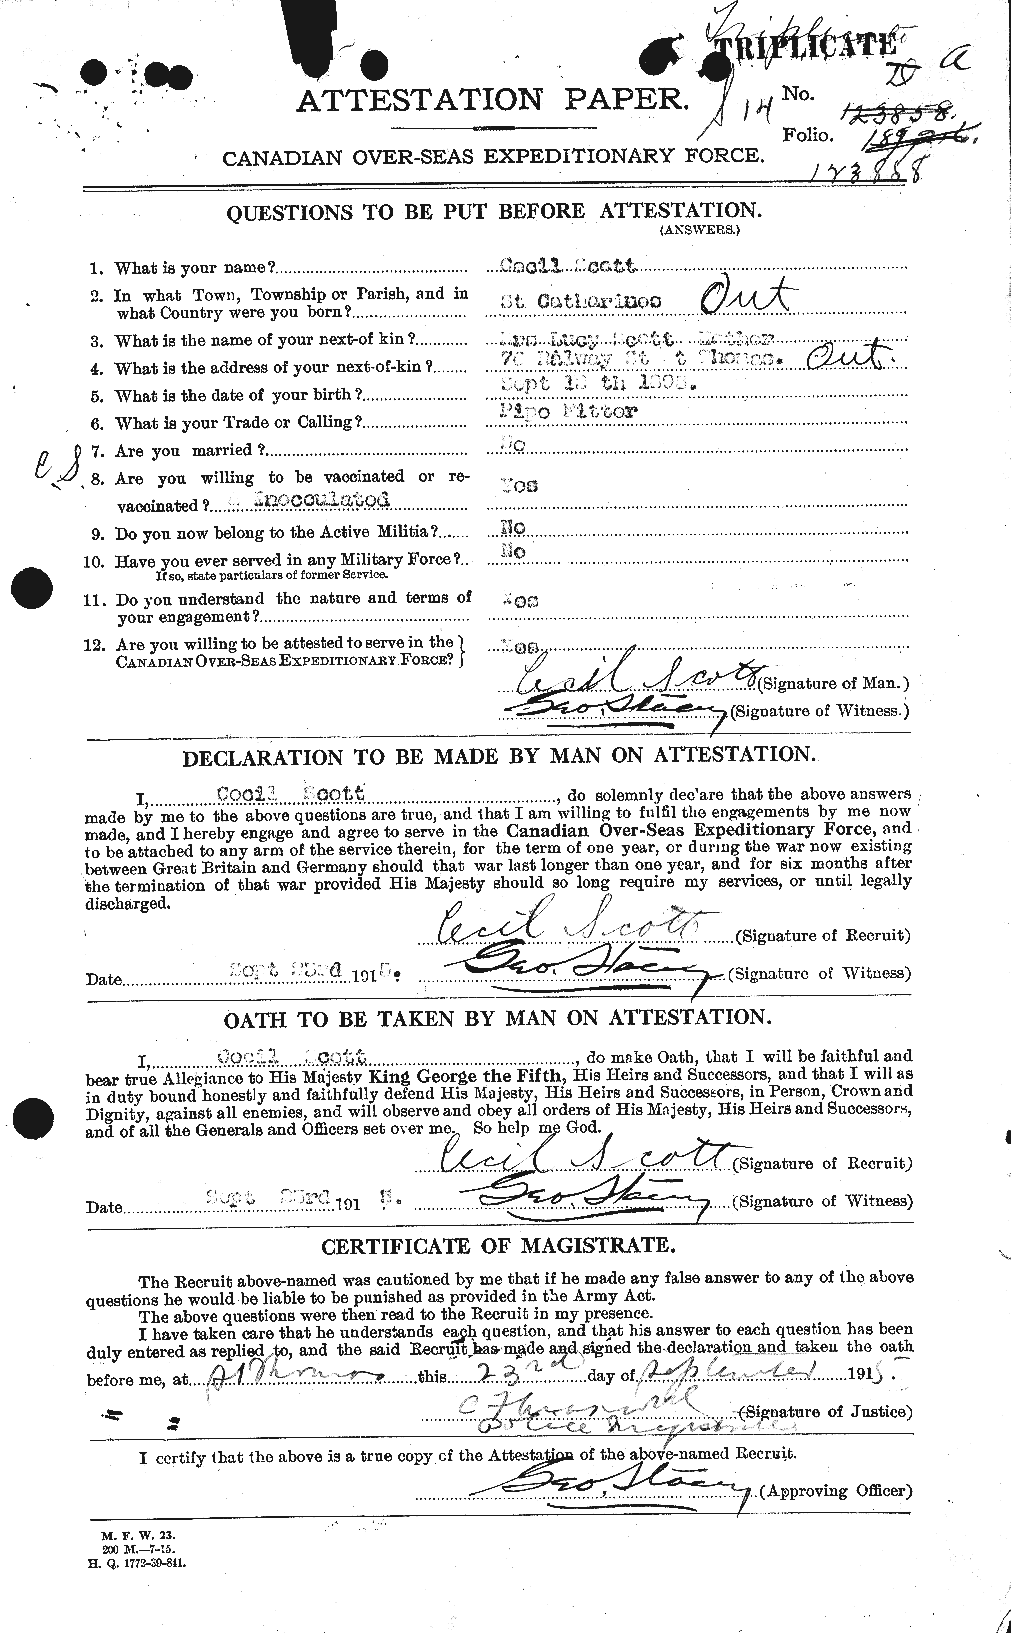 Personnel Records of the First World War - CEF 086204a